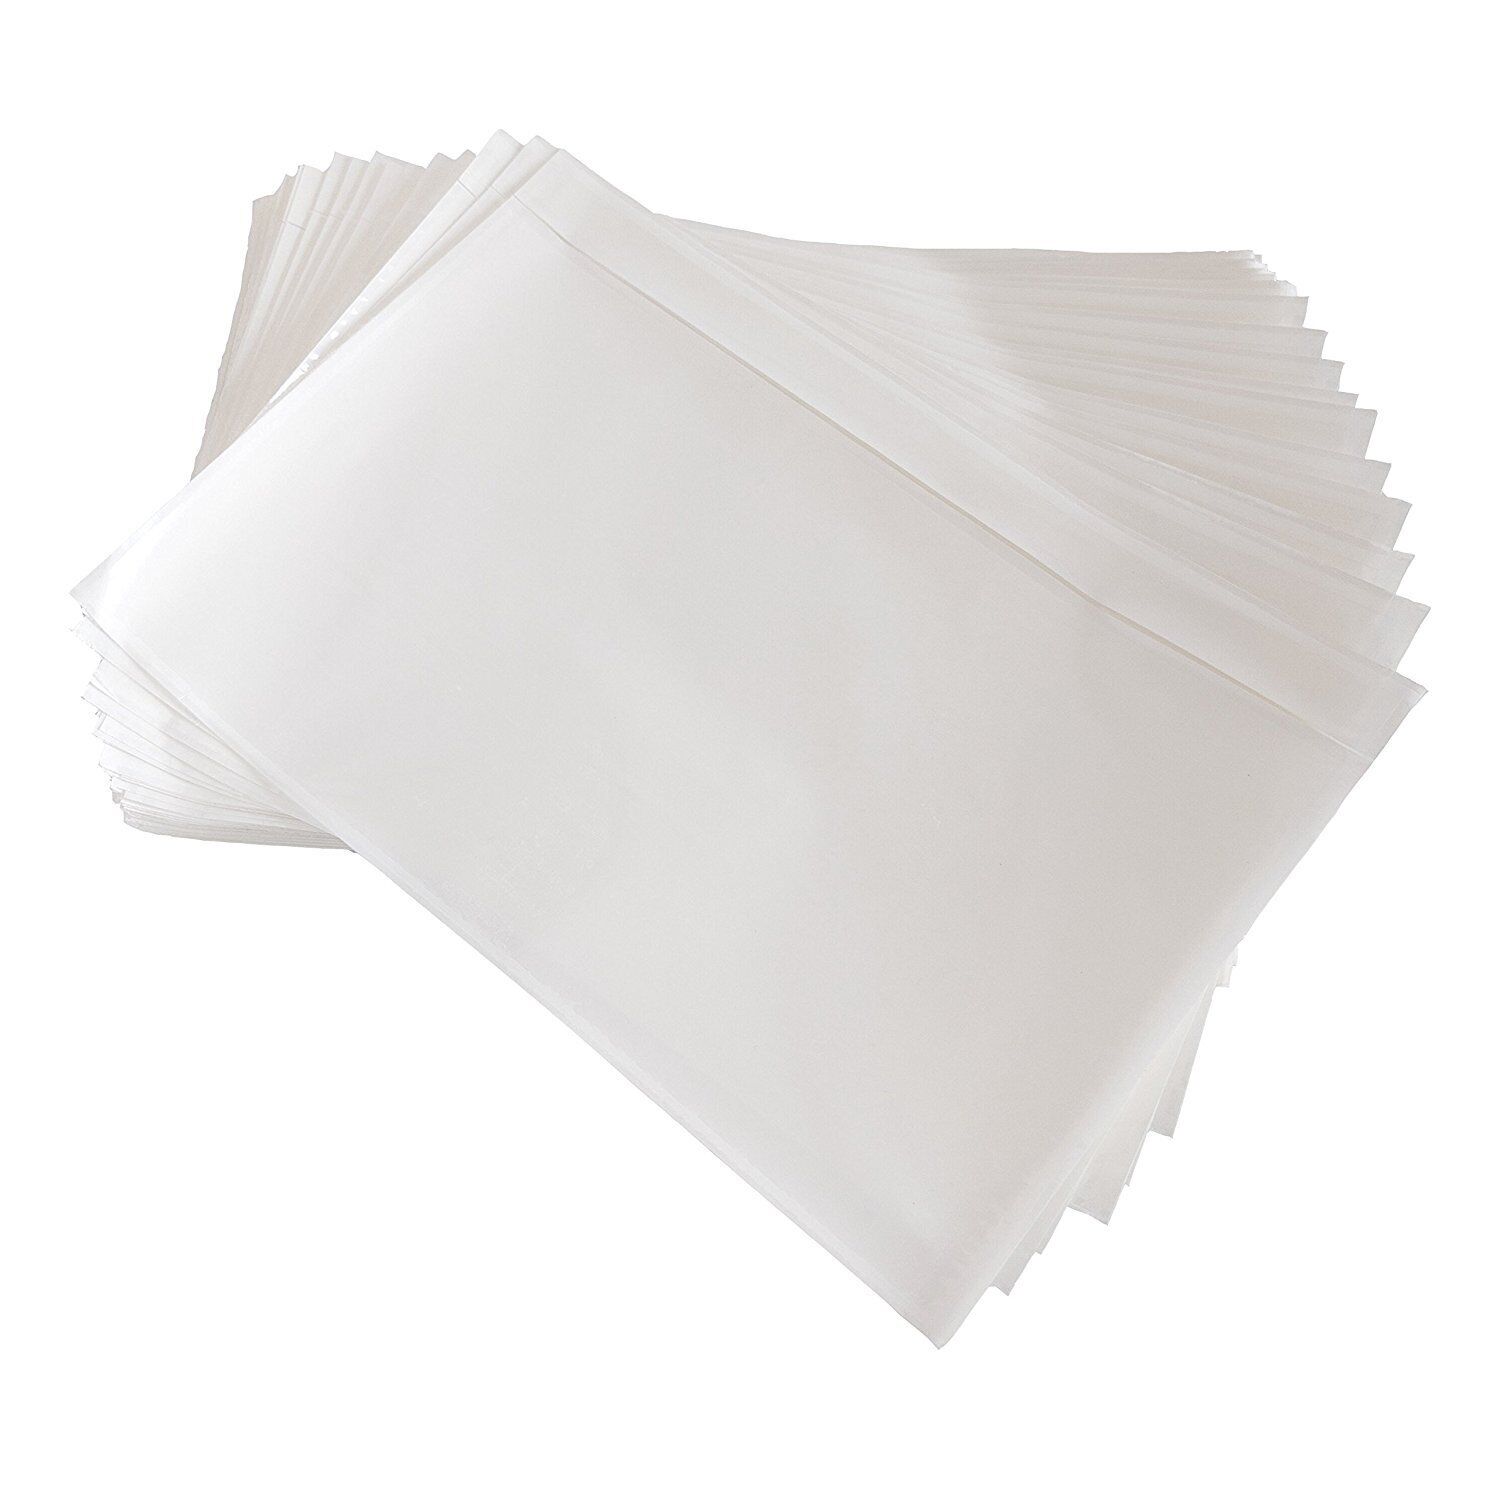 6”x9” Clear Envelope Pouches Slip Plastic Self Adhesive Shipping Label Packing Unbranded Does Not Apply